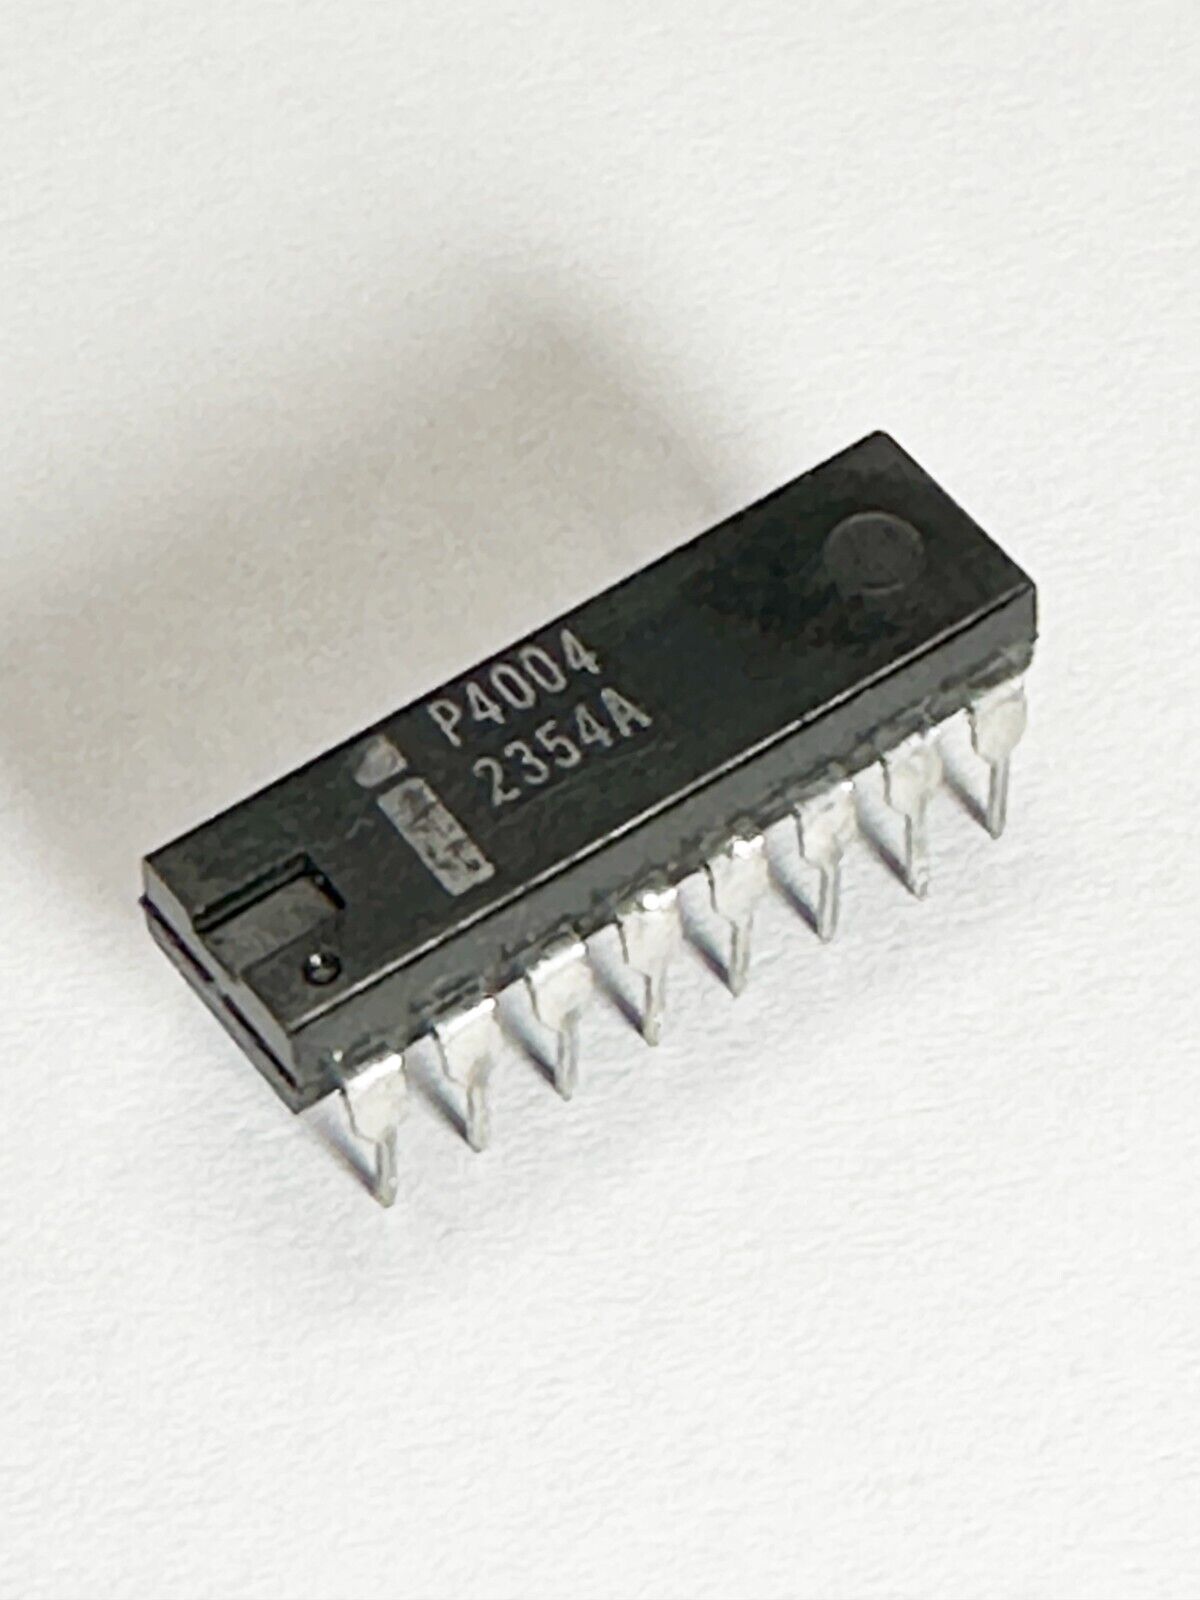 Intel 4004 - The First Microprocessor (NOS,P4004,1976,Malaysia,Tested